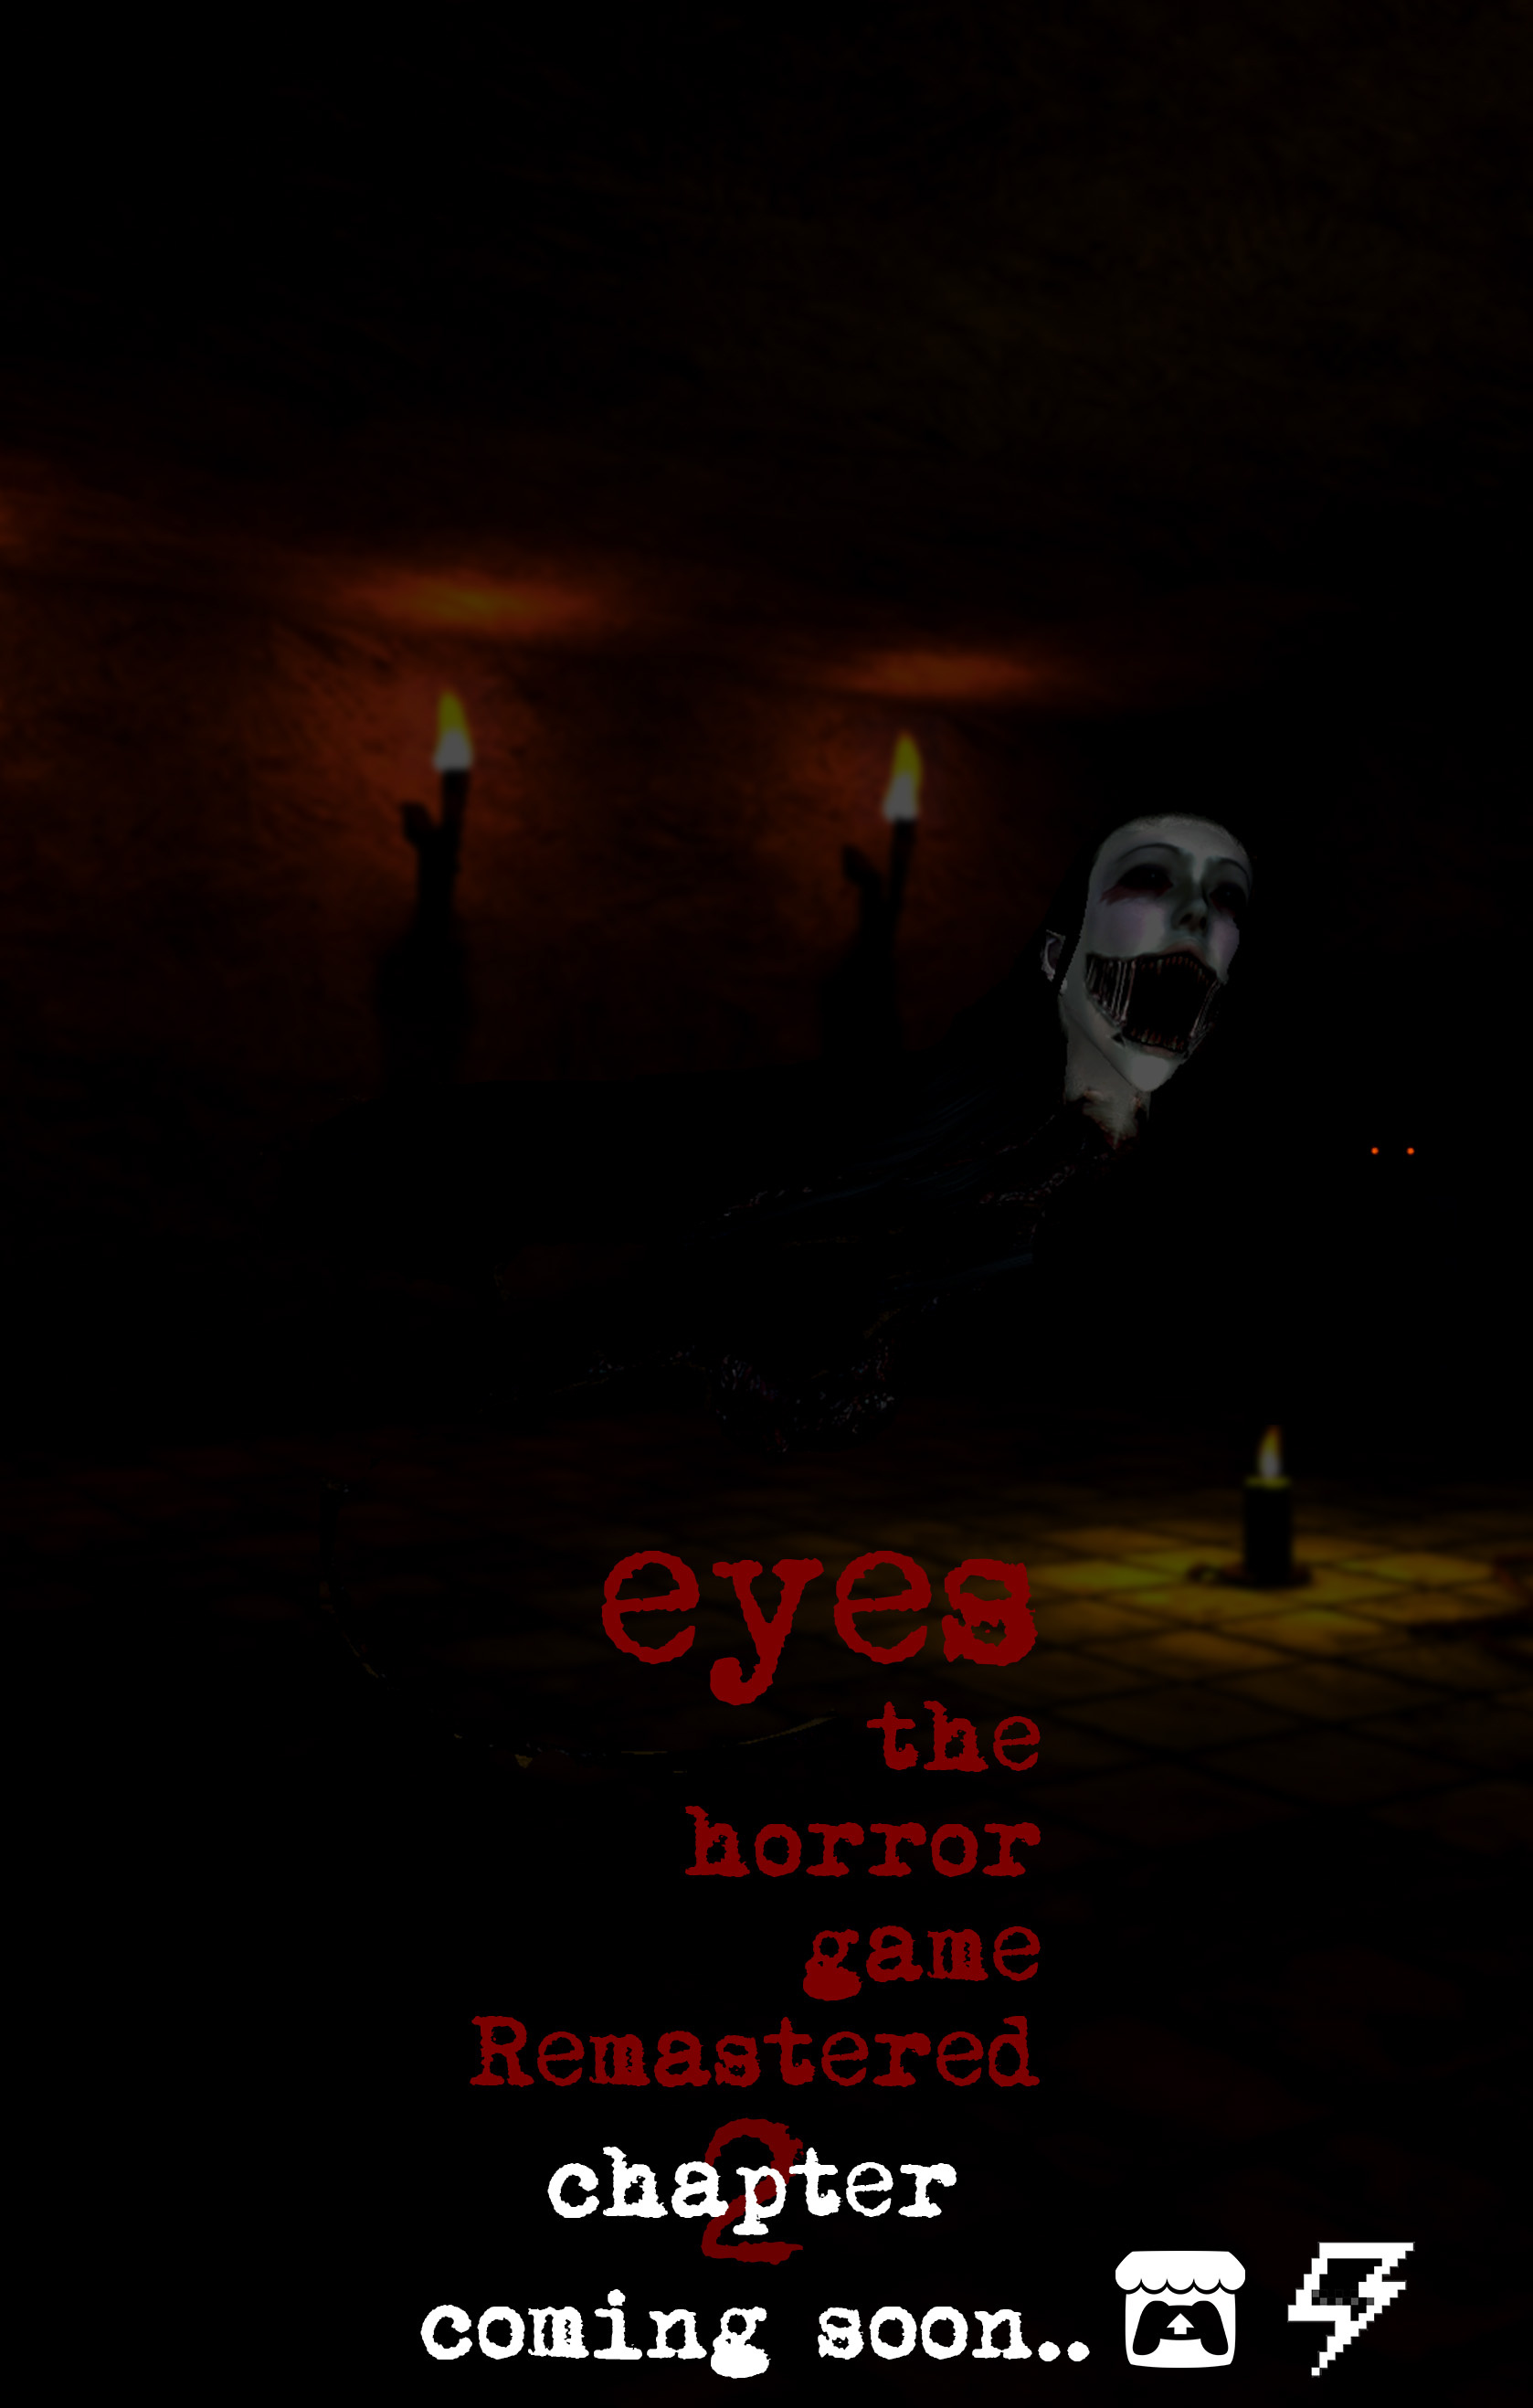 COOL UPDATE in Eyes The Horror Game remastered PC-version! 3.0.5!!! 